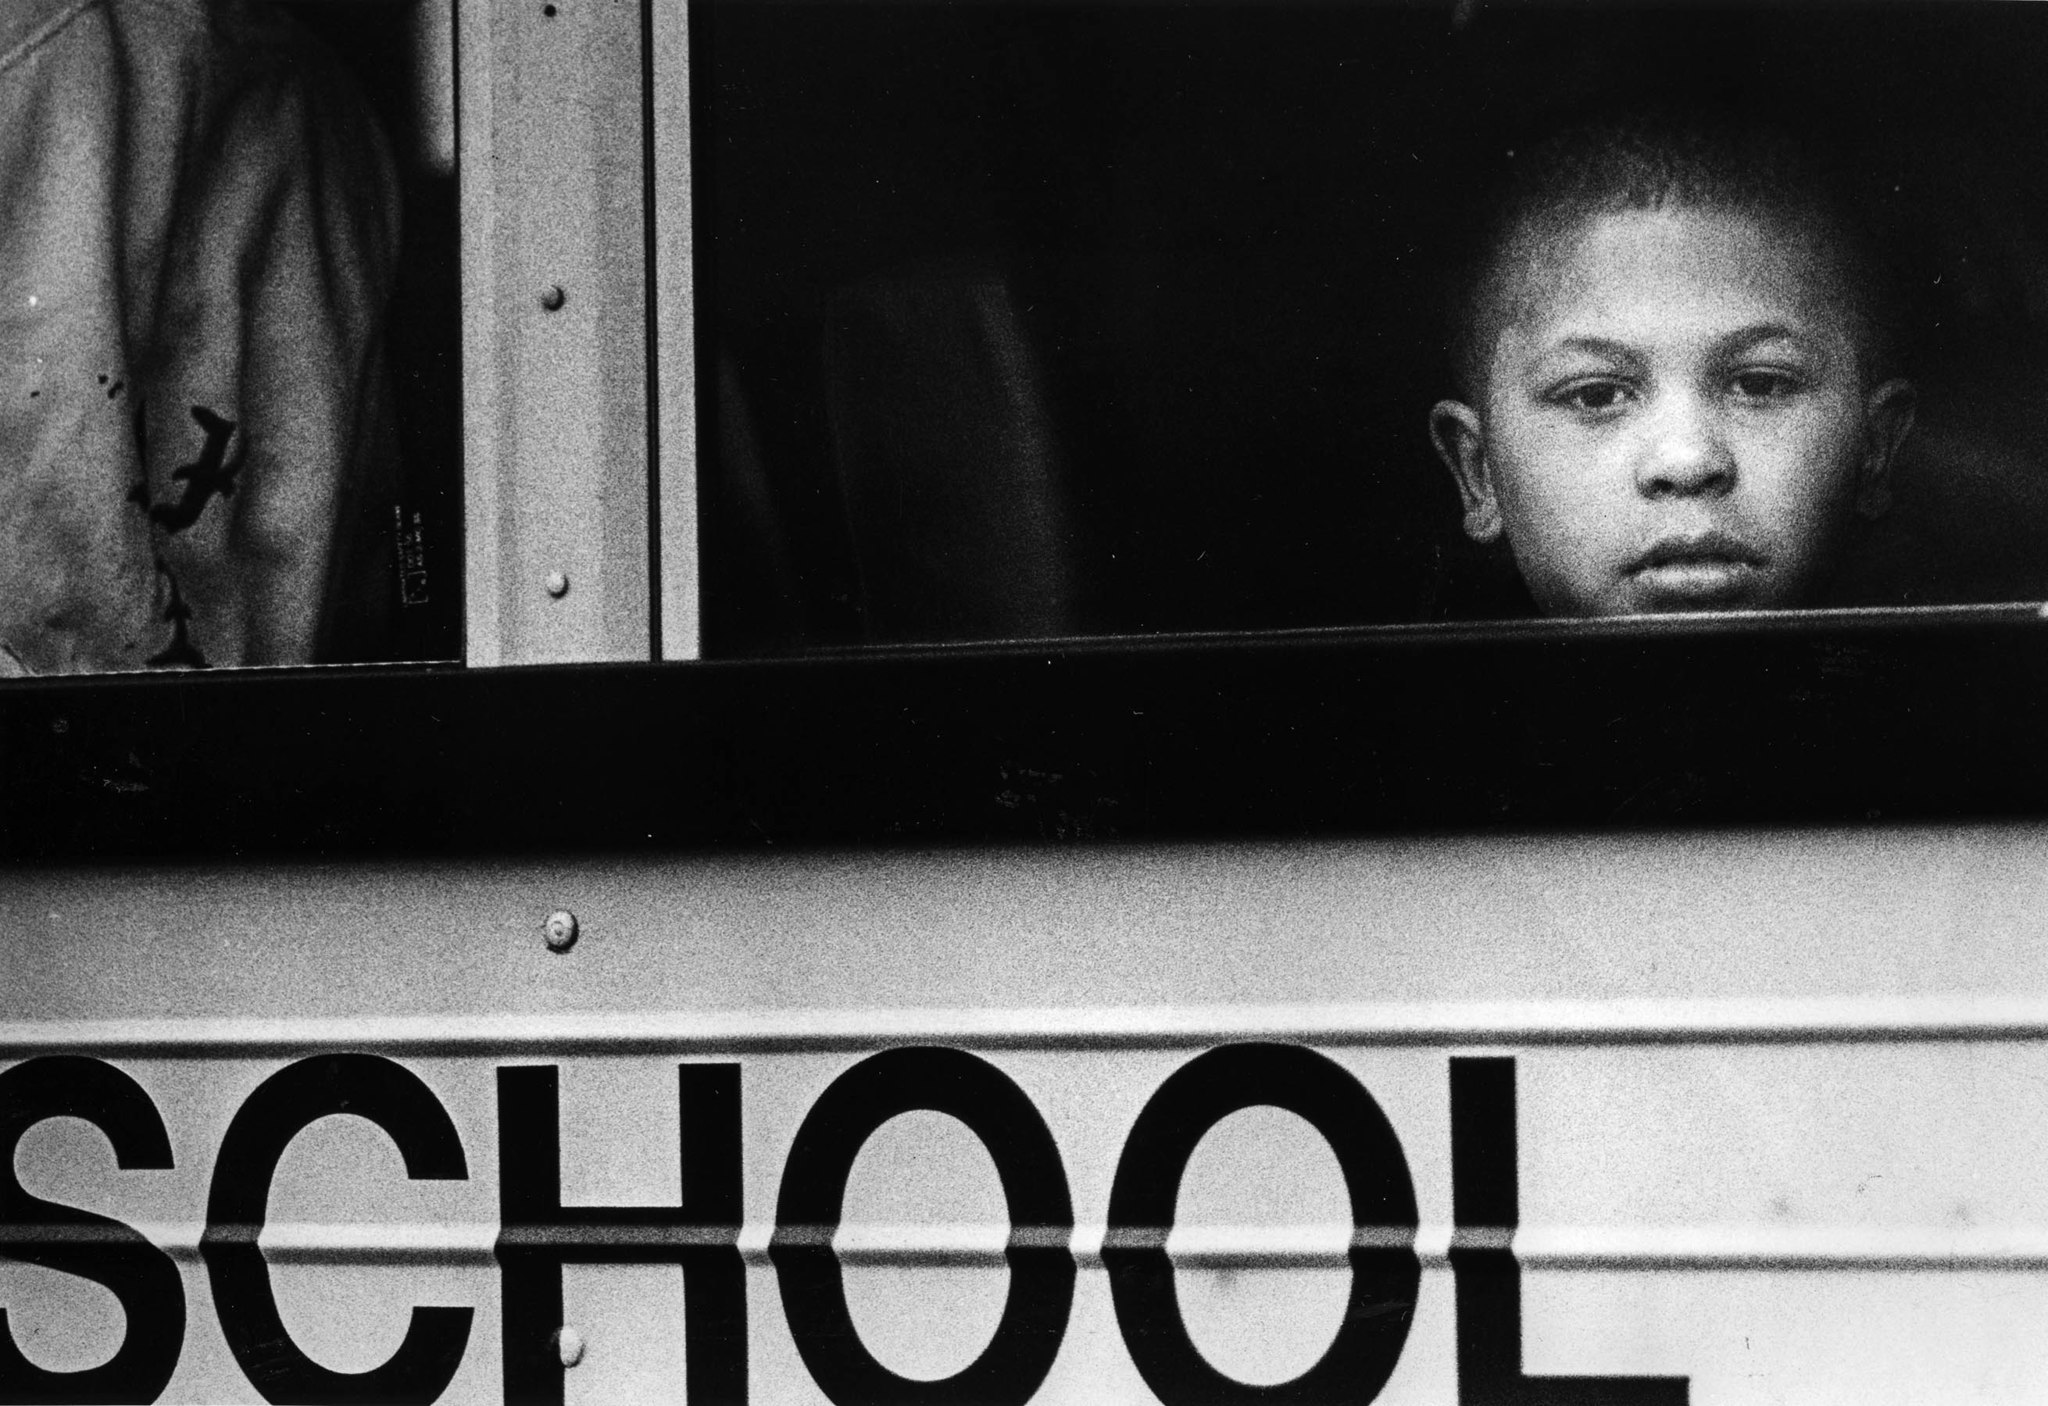 Aug. 14, 1987: A child peers out of school bus window as she waits for others from the Urban Campgro